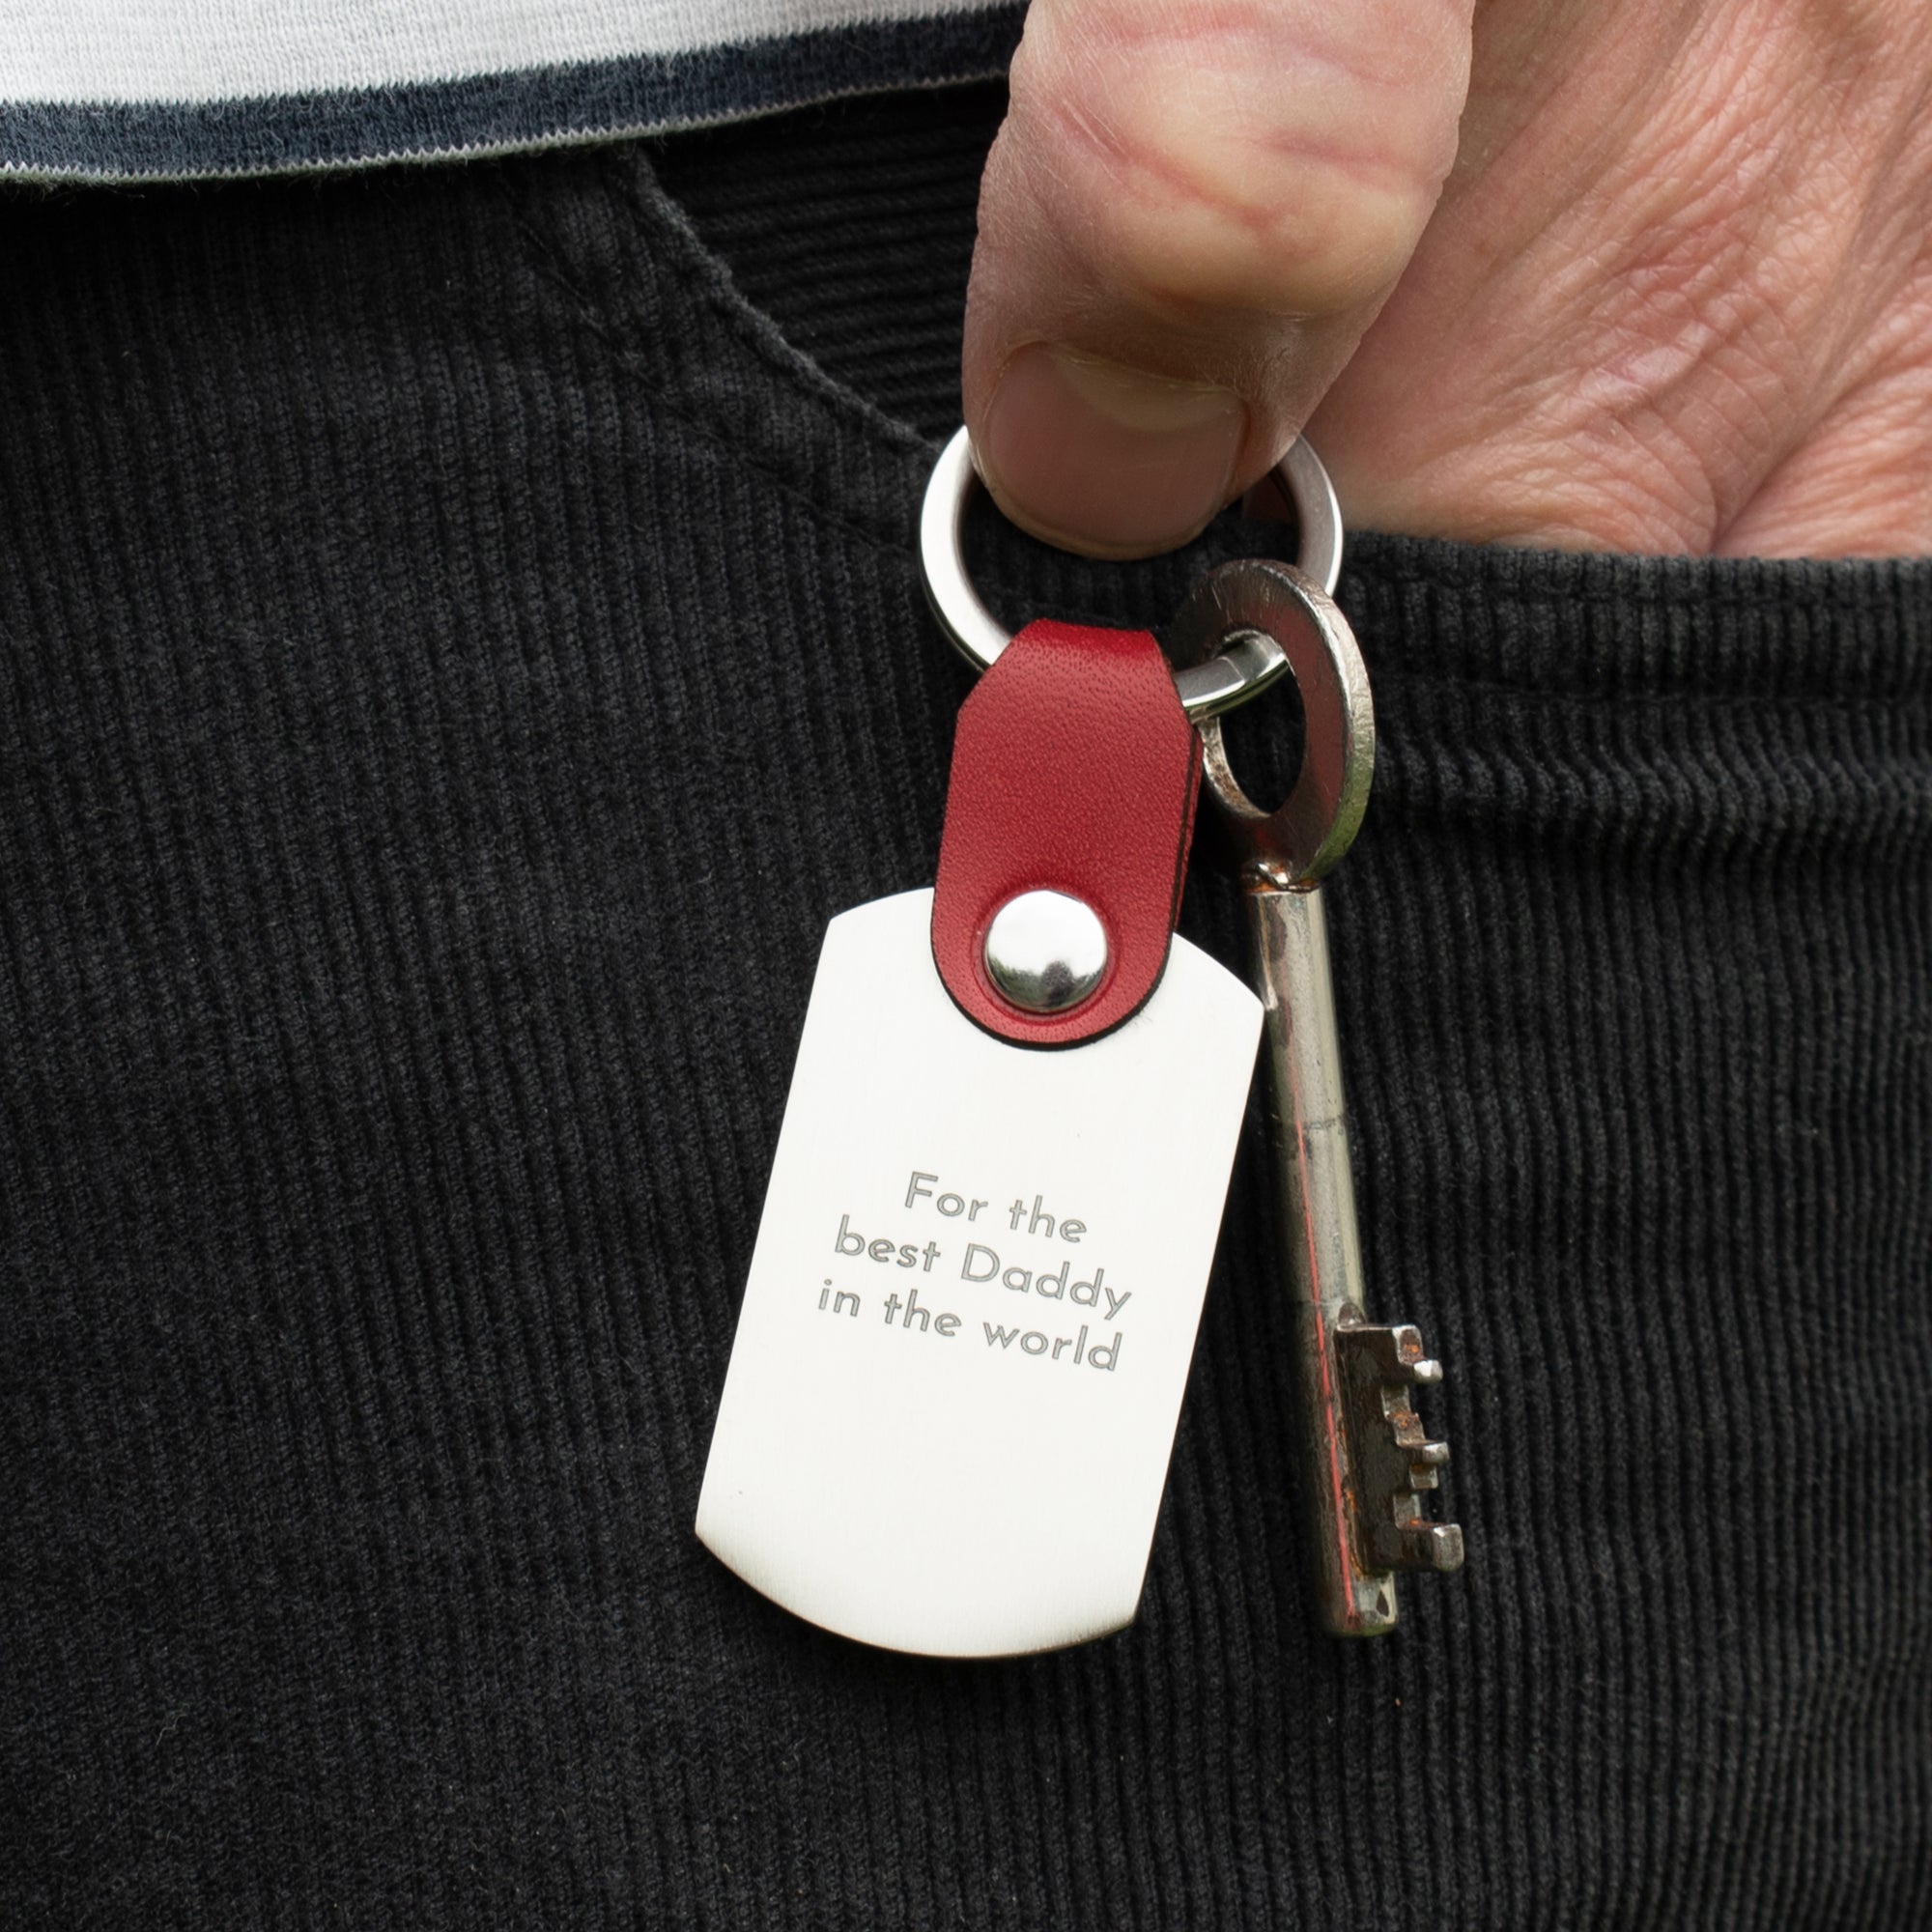 Personalised Time Stood Still Engraved Leather Key Ring